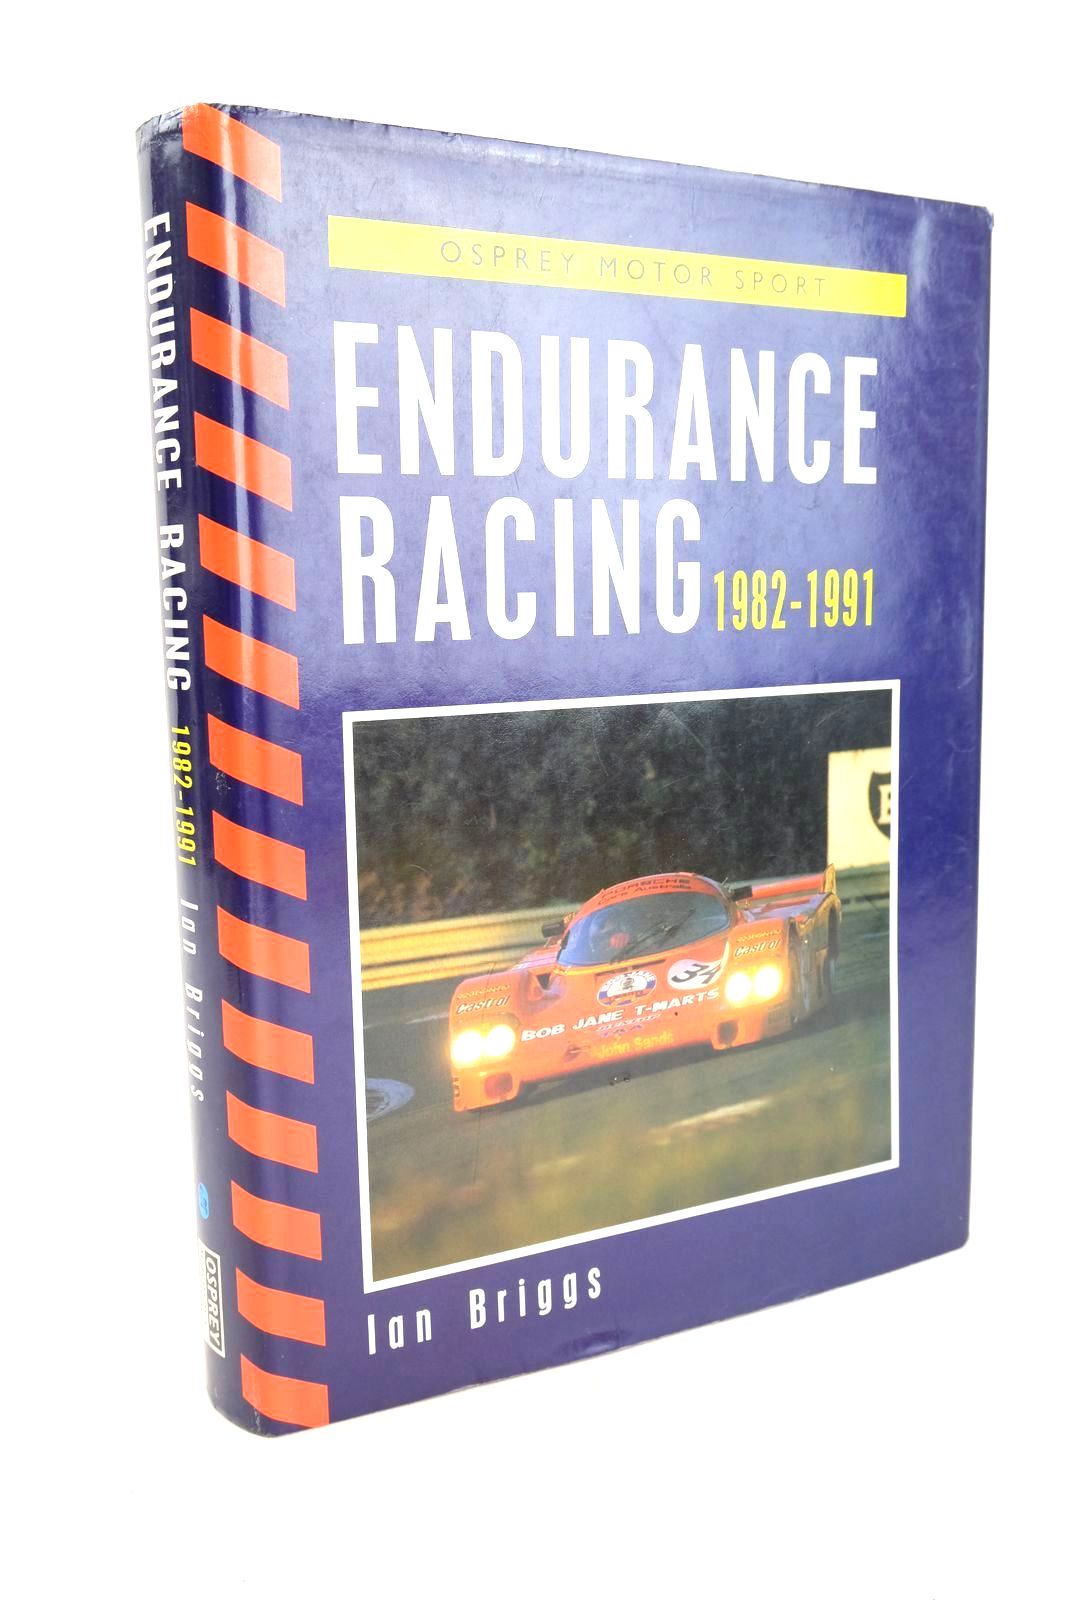 Photo of ENDURANCE RACING 1982-1991 written by Briggs, Ian published by Osprey Automotive (STOCK CODE: 1327042)  for sale by Stella & Rose's Books